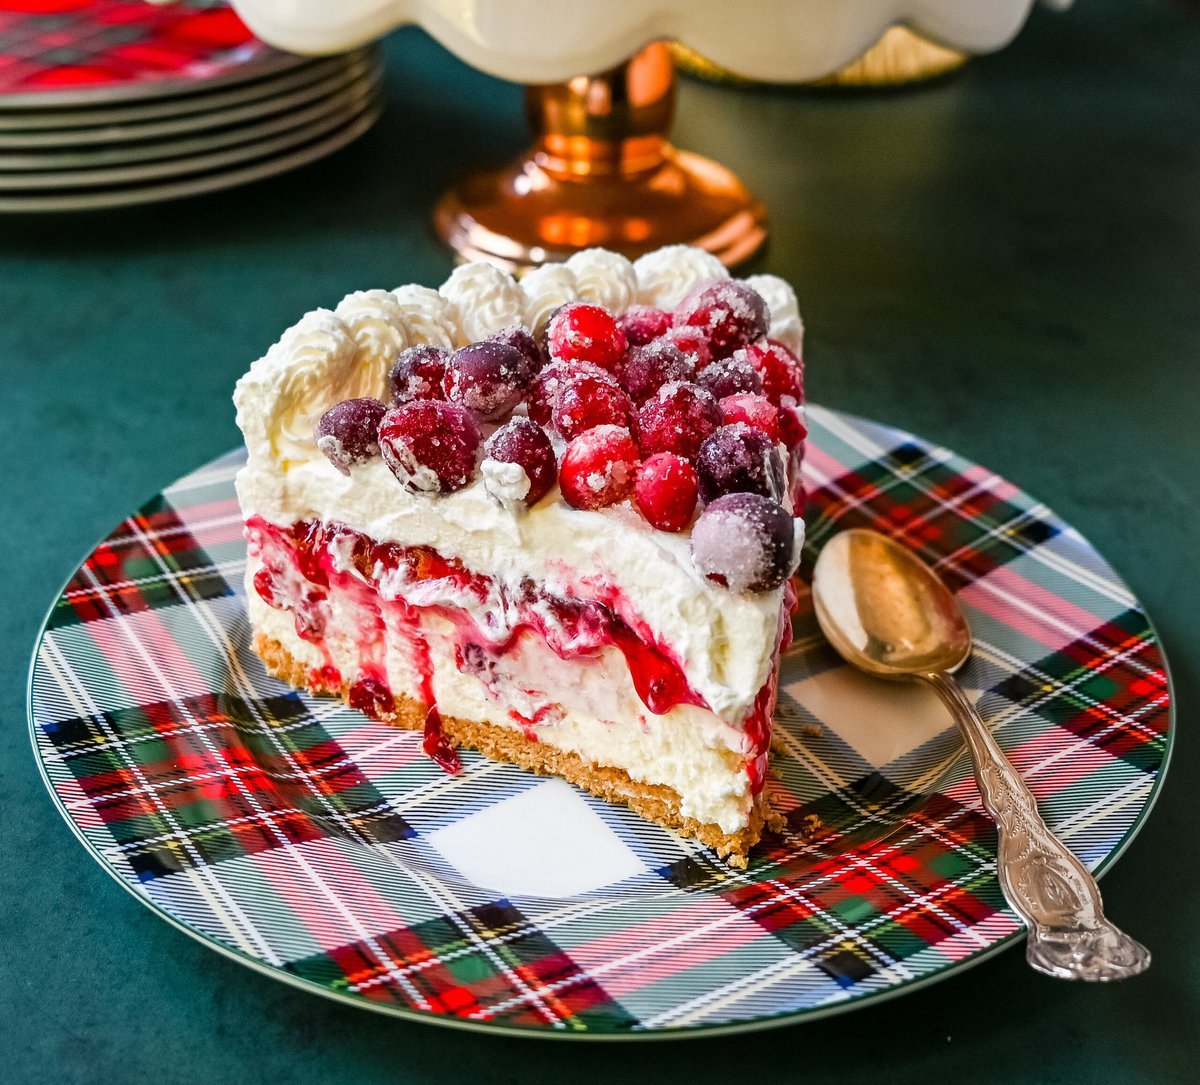 No-Bake Cranberry White Chocolate Cheesecake. This is a beautiful Christmas Cranberry Cheesecake perfect for the holidays. This no-bake white chocolate cheesecake has a graham cracker crust, white chocolate cream cheese filling, topped with homemade cranberry jam, sugared cranberries, and whipped cream.